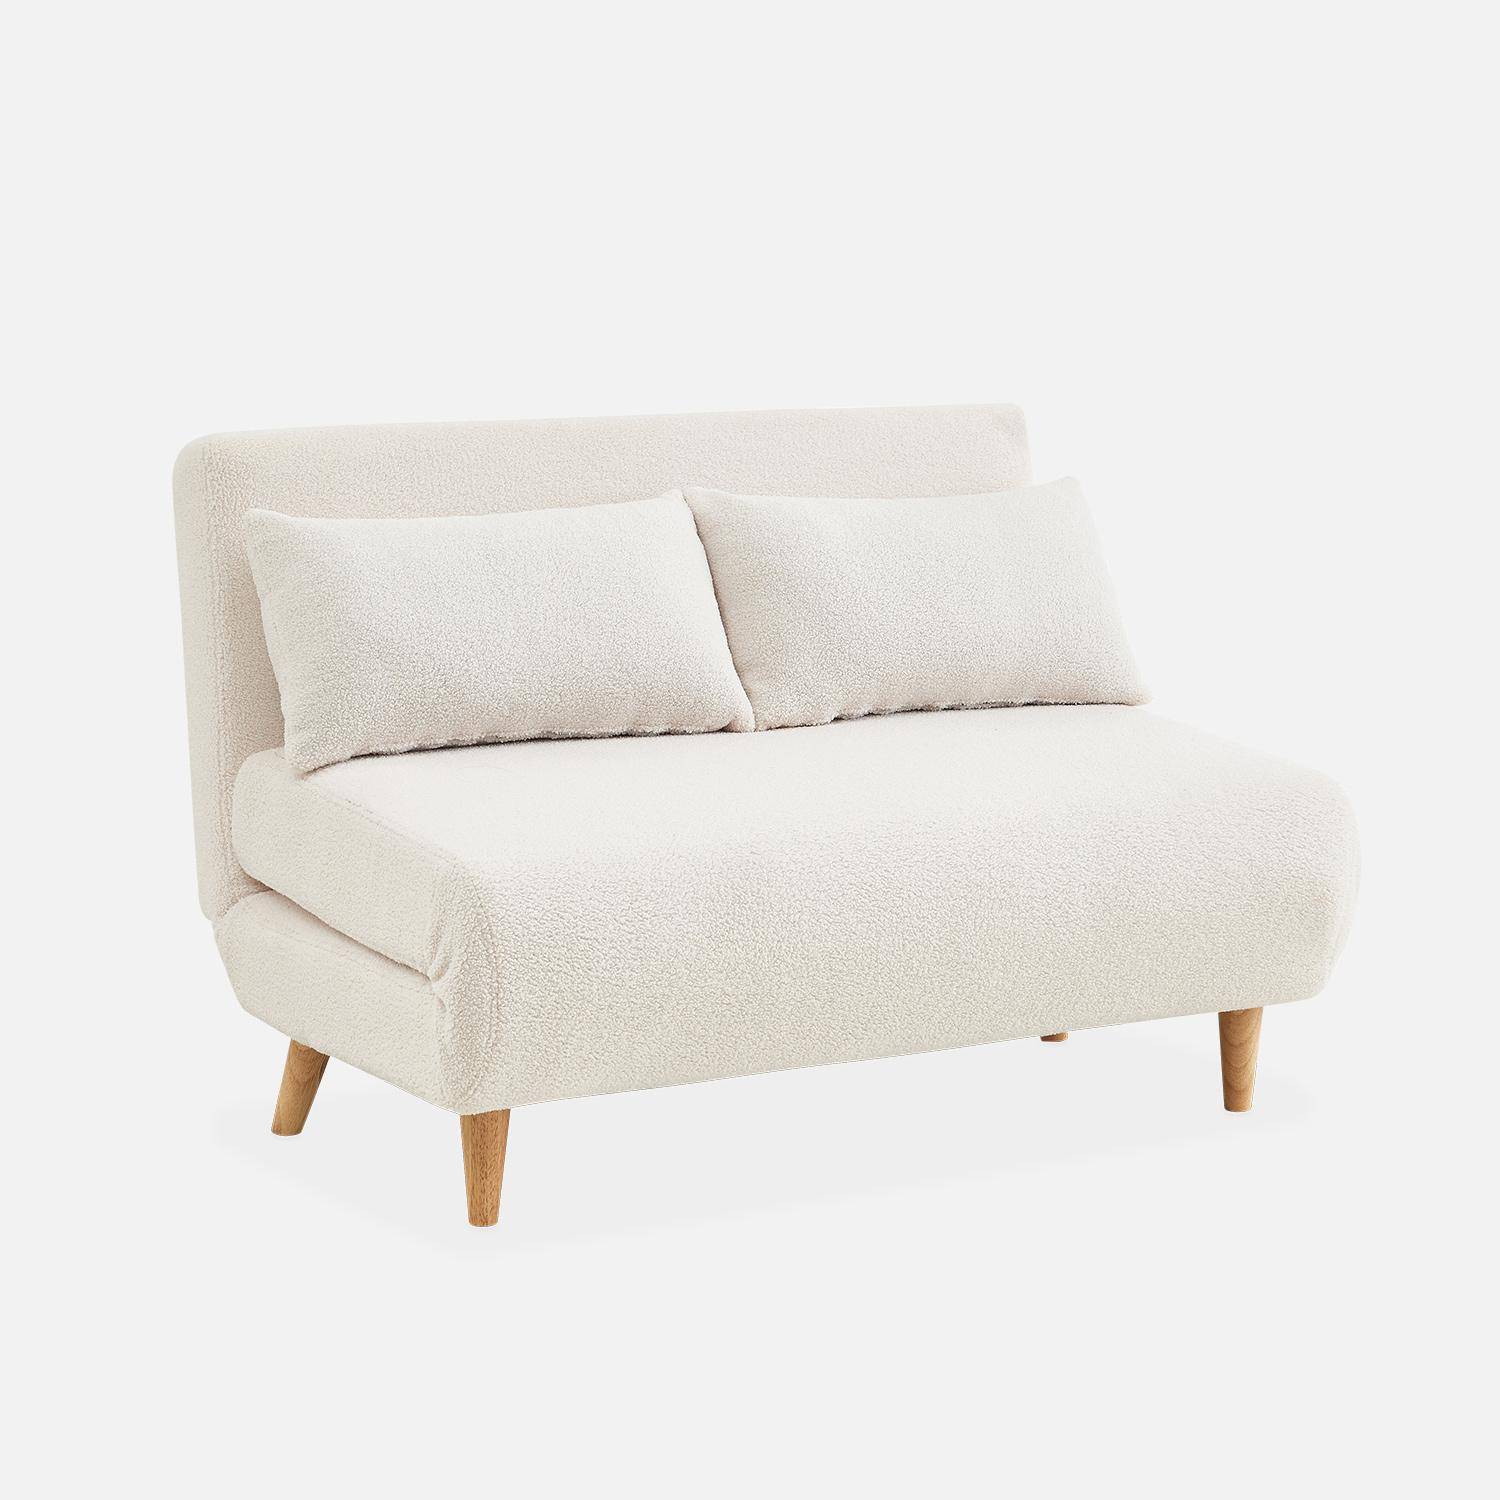 Sleeper, 2-Seater Convertible Sofa with Wooden Legs,  L120xW81xH82cm, white bouclette,sweeek,Photo3